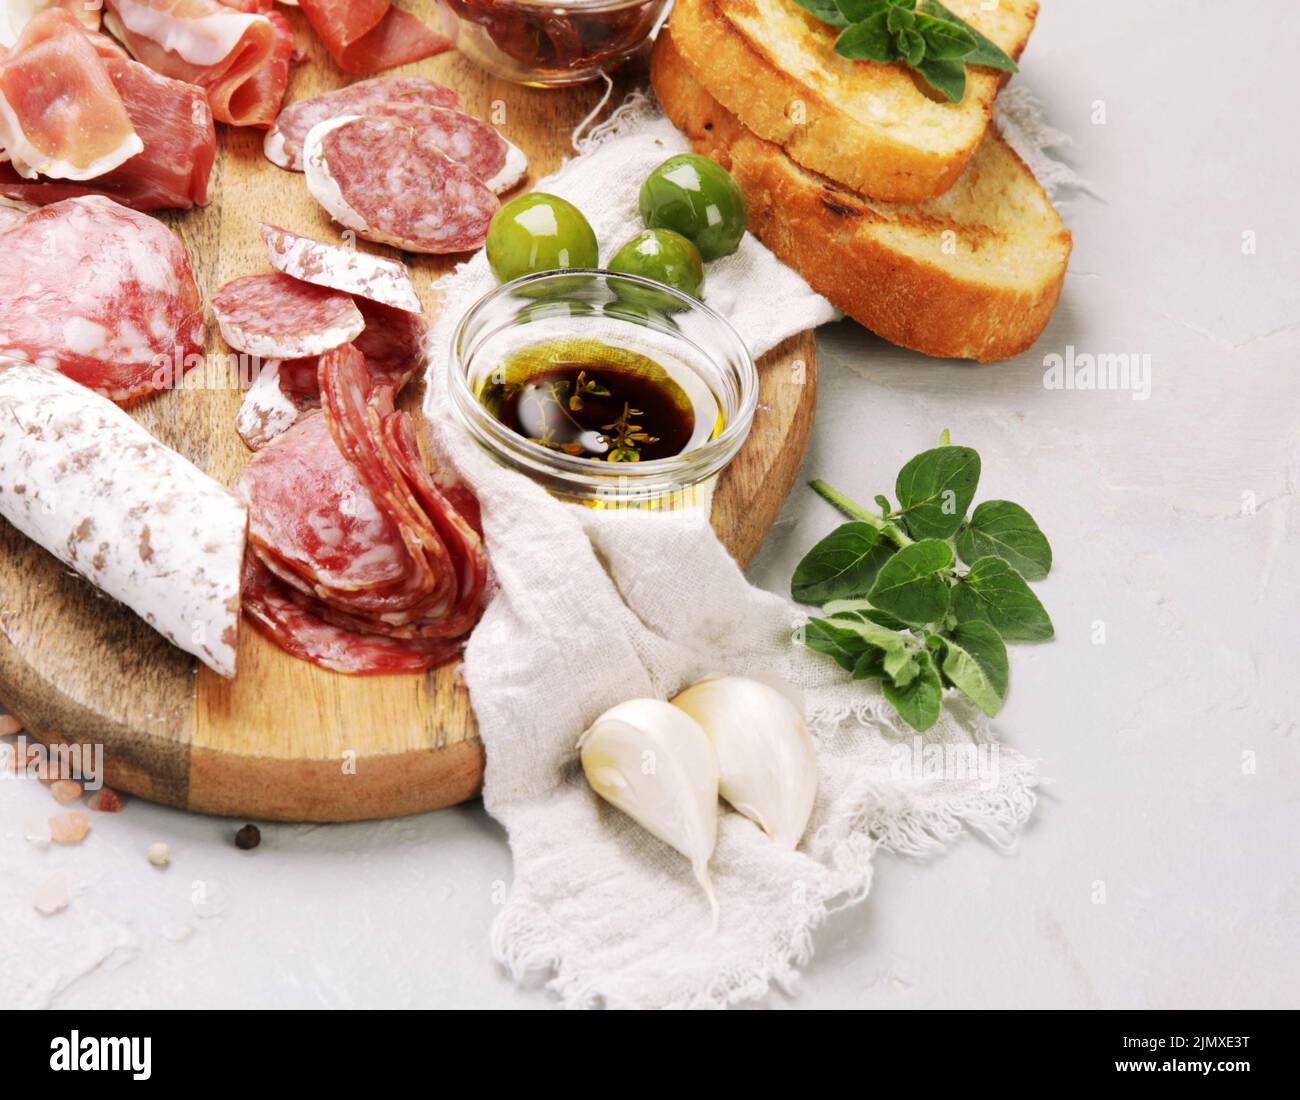 Sausages assortment on light background. Meat product made of finely chopped and seasoned meat. copy space Stock Photo